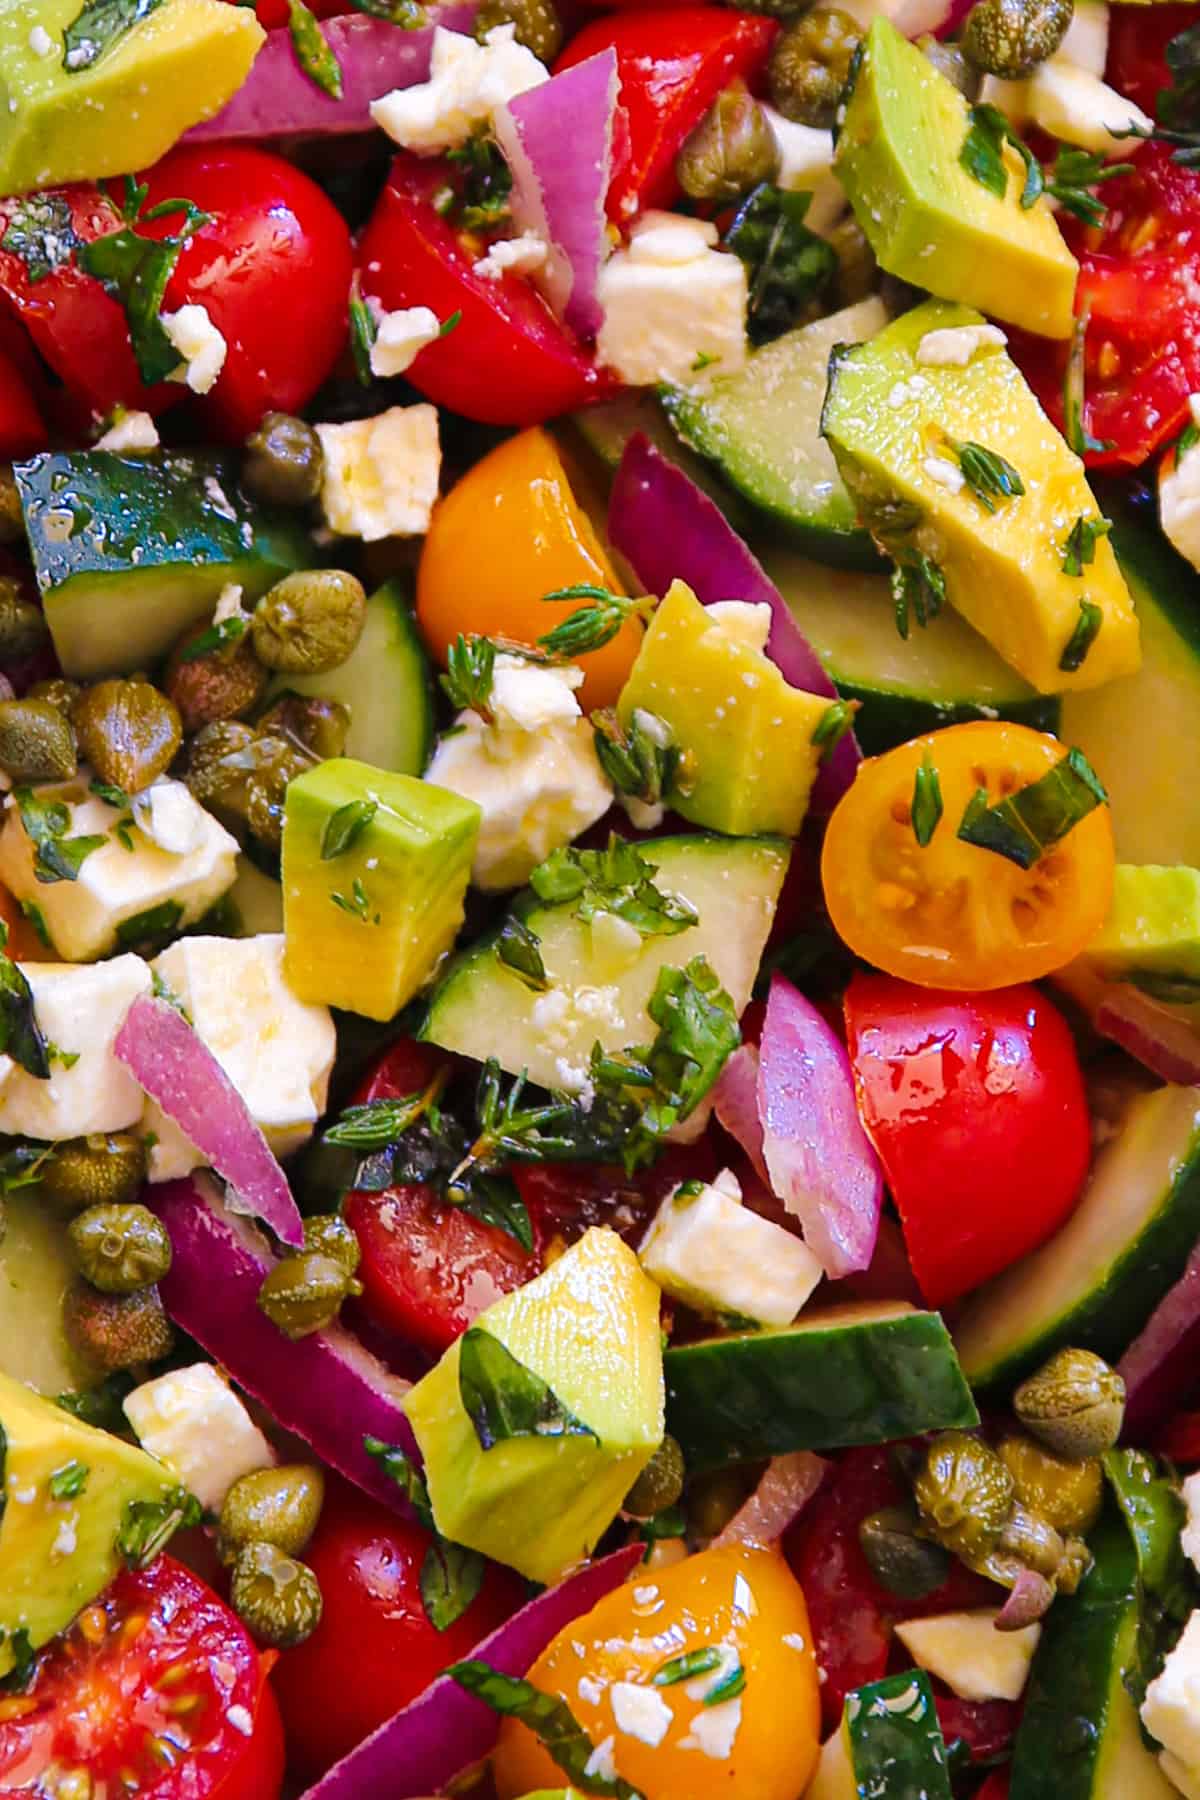 Greek salad with tomato, cucumber, red onion, avocado, capers and feta cheese - closeup.